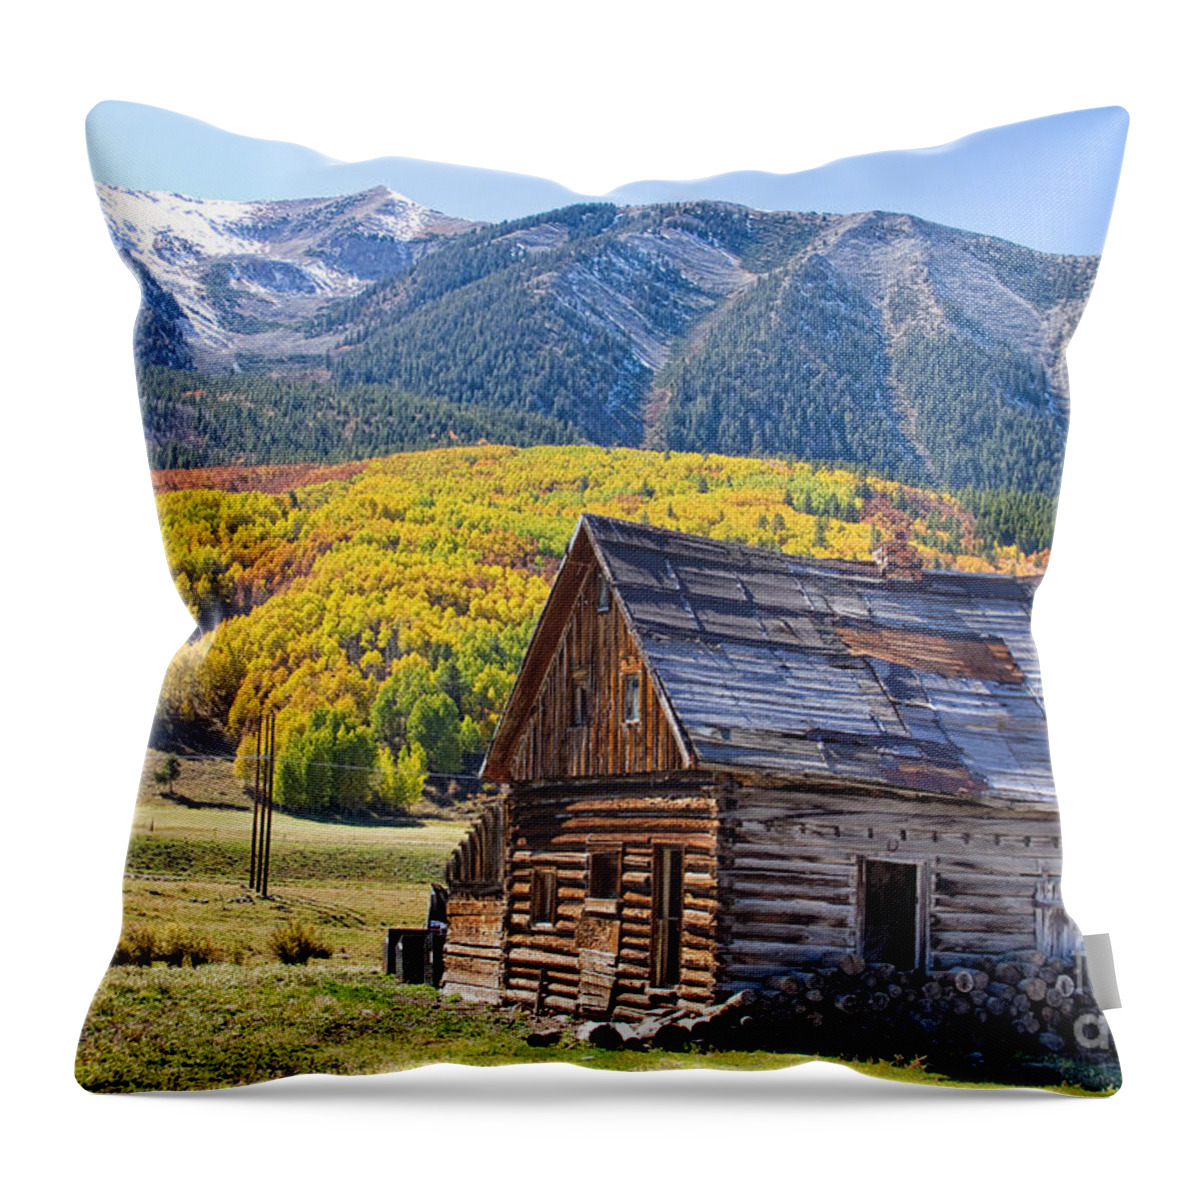 Aspens Throw Pillow featuring the photograph Rustic Rural Colorado Cabin Autumn Landscape by James BO Insogna